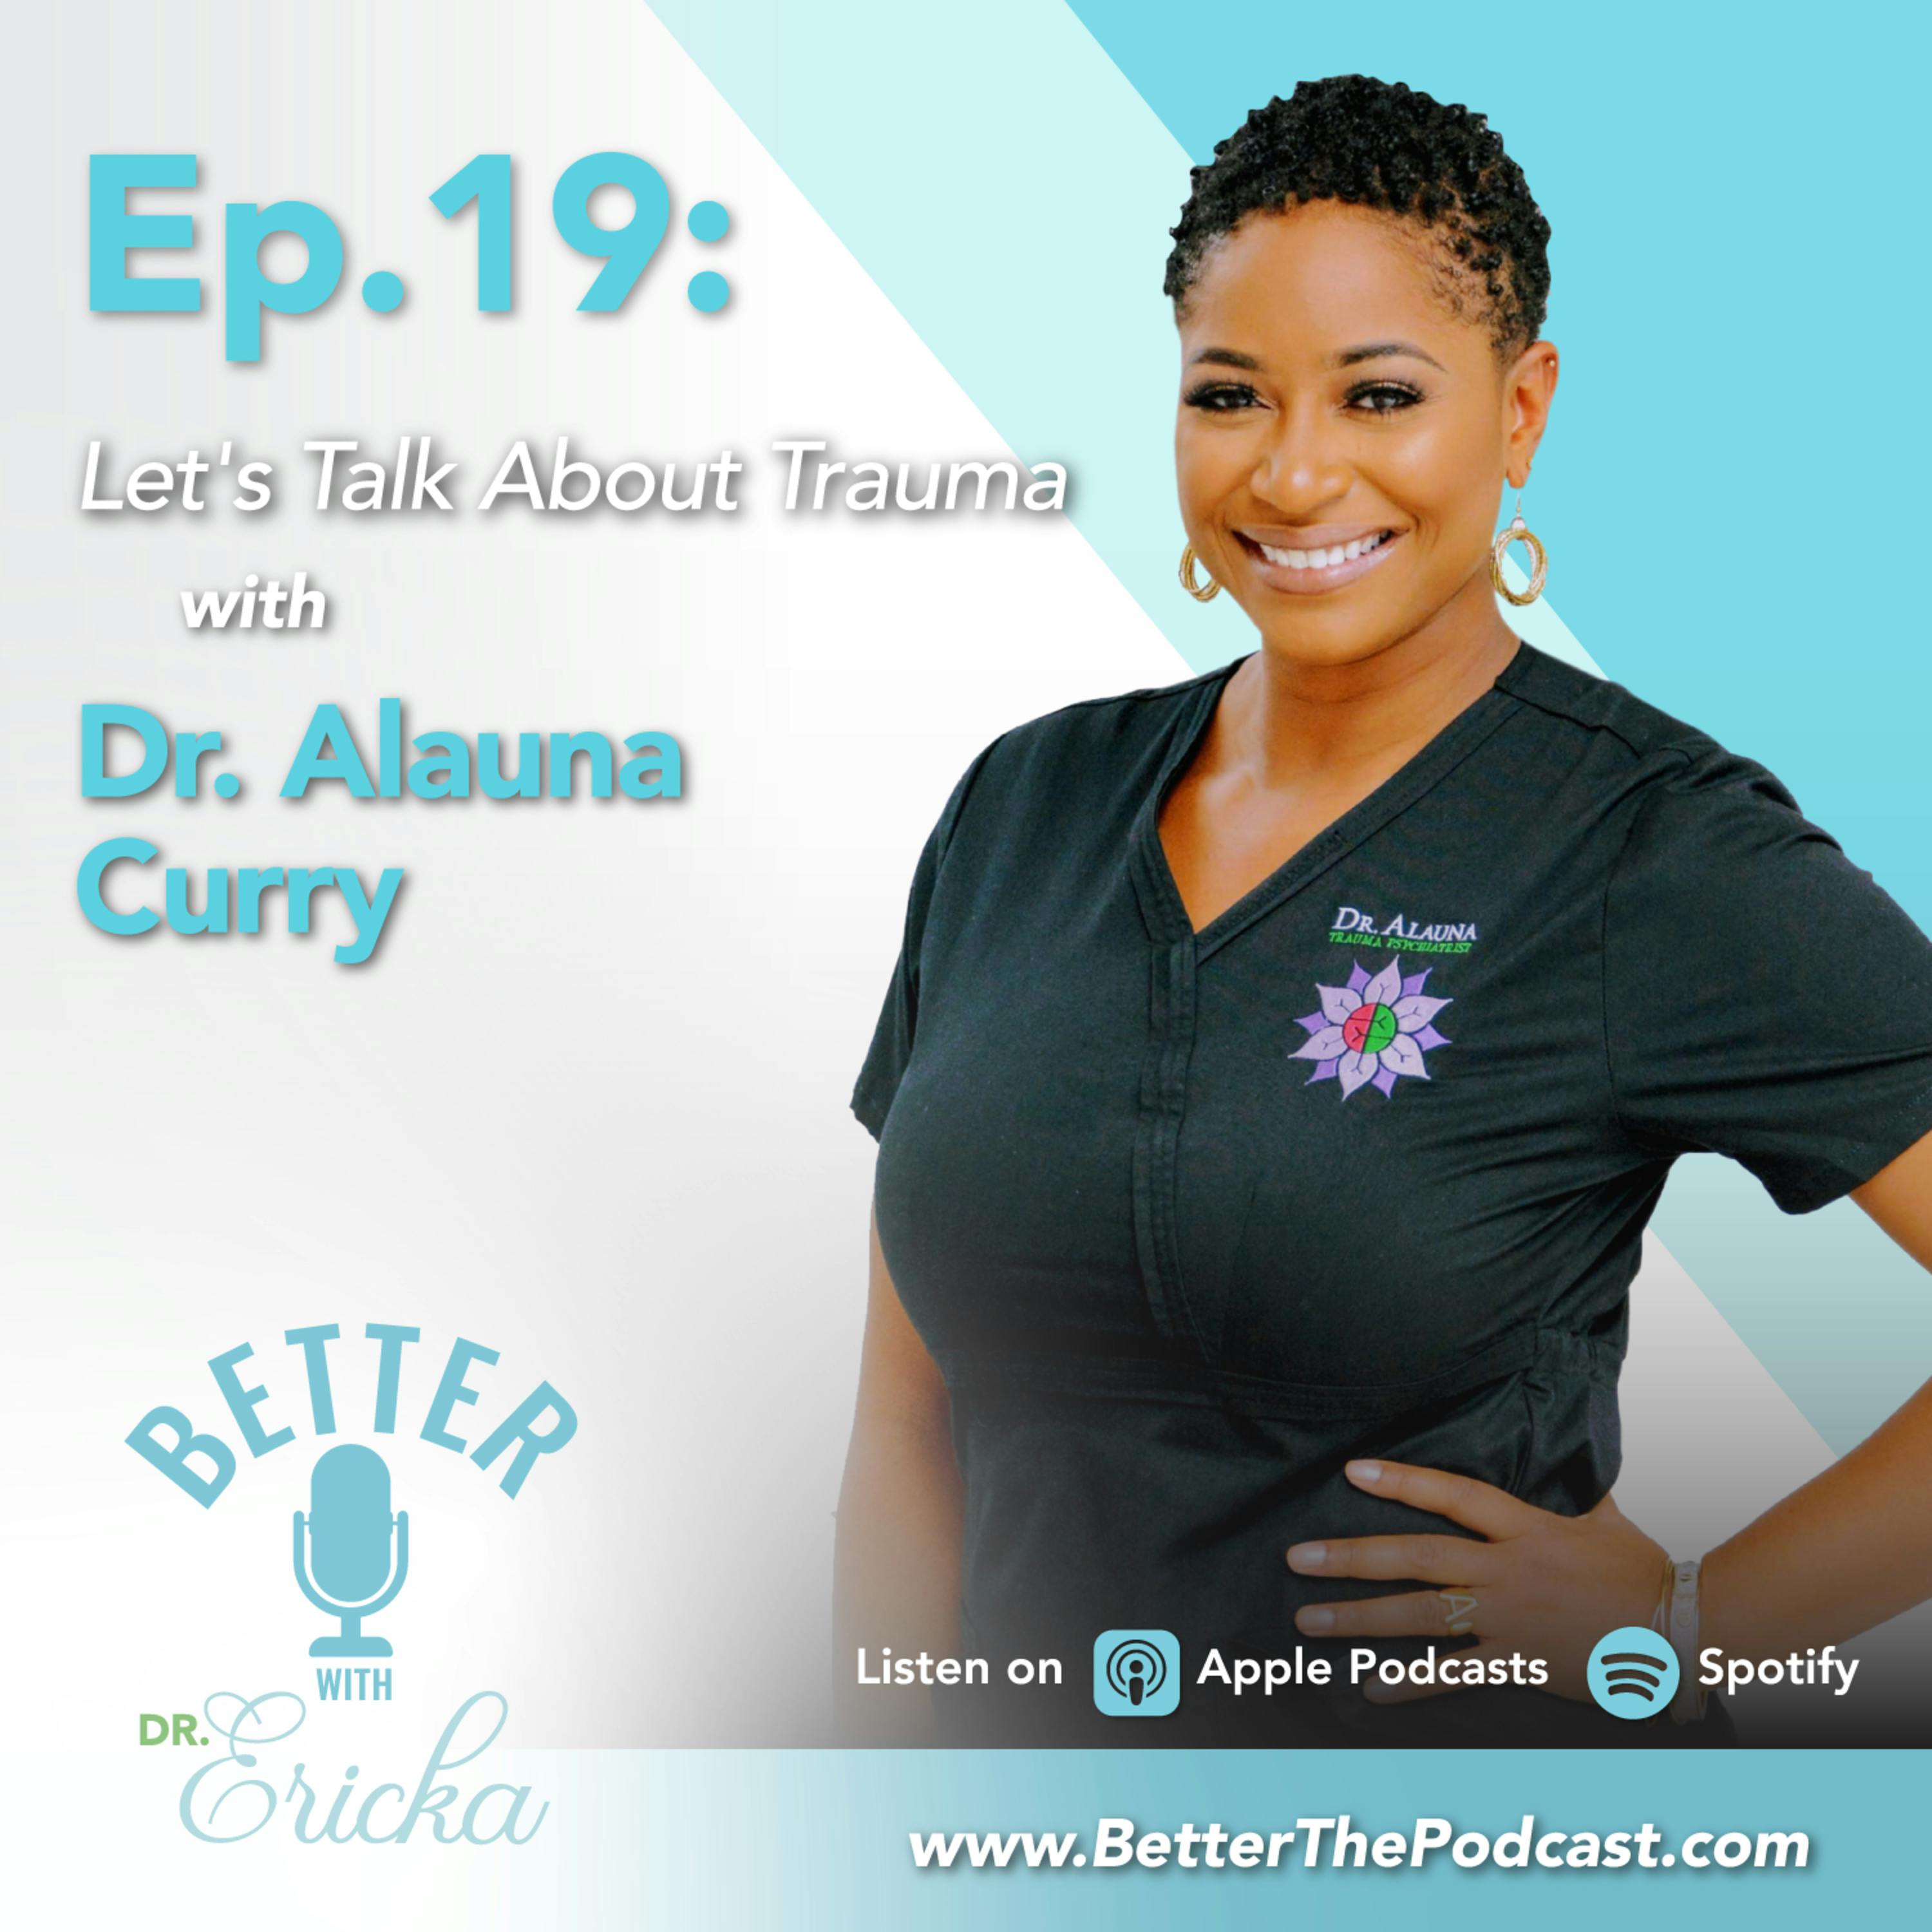 Let’s Talk About Trauma with Dr. Alauna Curry